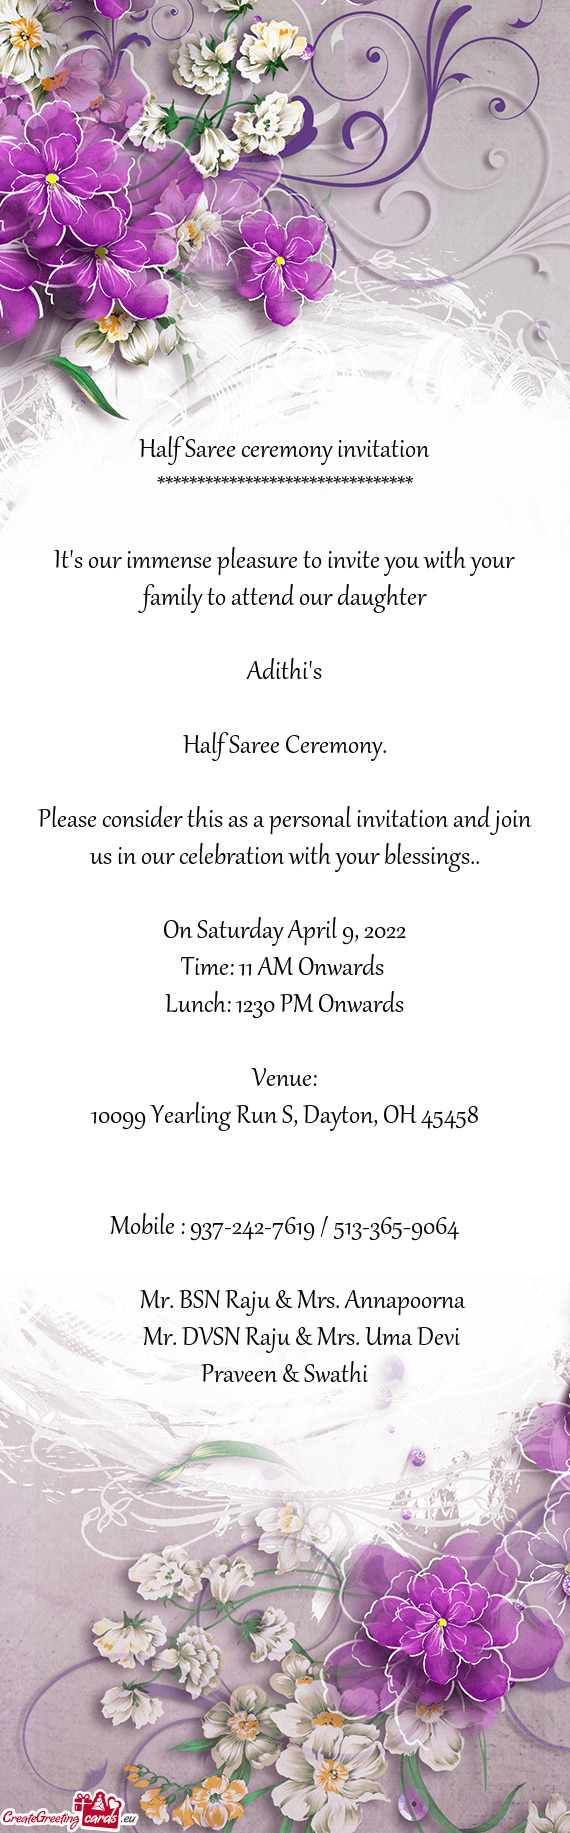 Please consider this as a personal invitation and join us in our celebration with your blessings